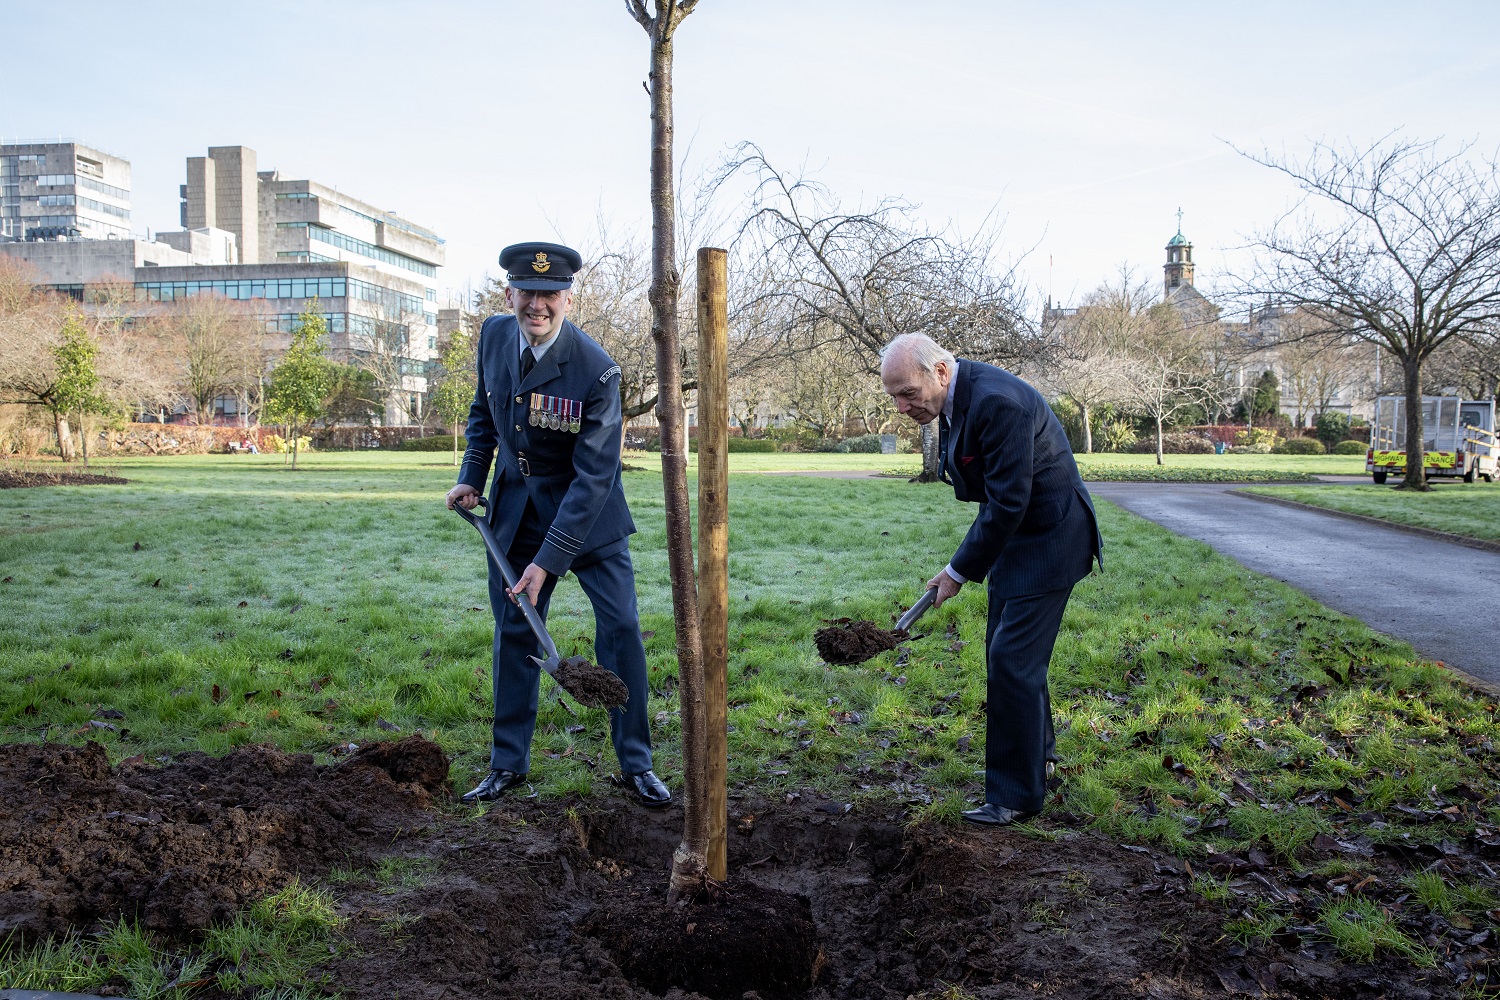 Photo: Wing Commander Olly Walker, Officer Commanding, 614 Sqn and Group Captain (retd) Richard Mighall, Trustee Chairman of the Royal Auxiliary Air Force Foundation plant the Flowering Cherry.